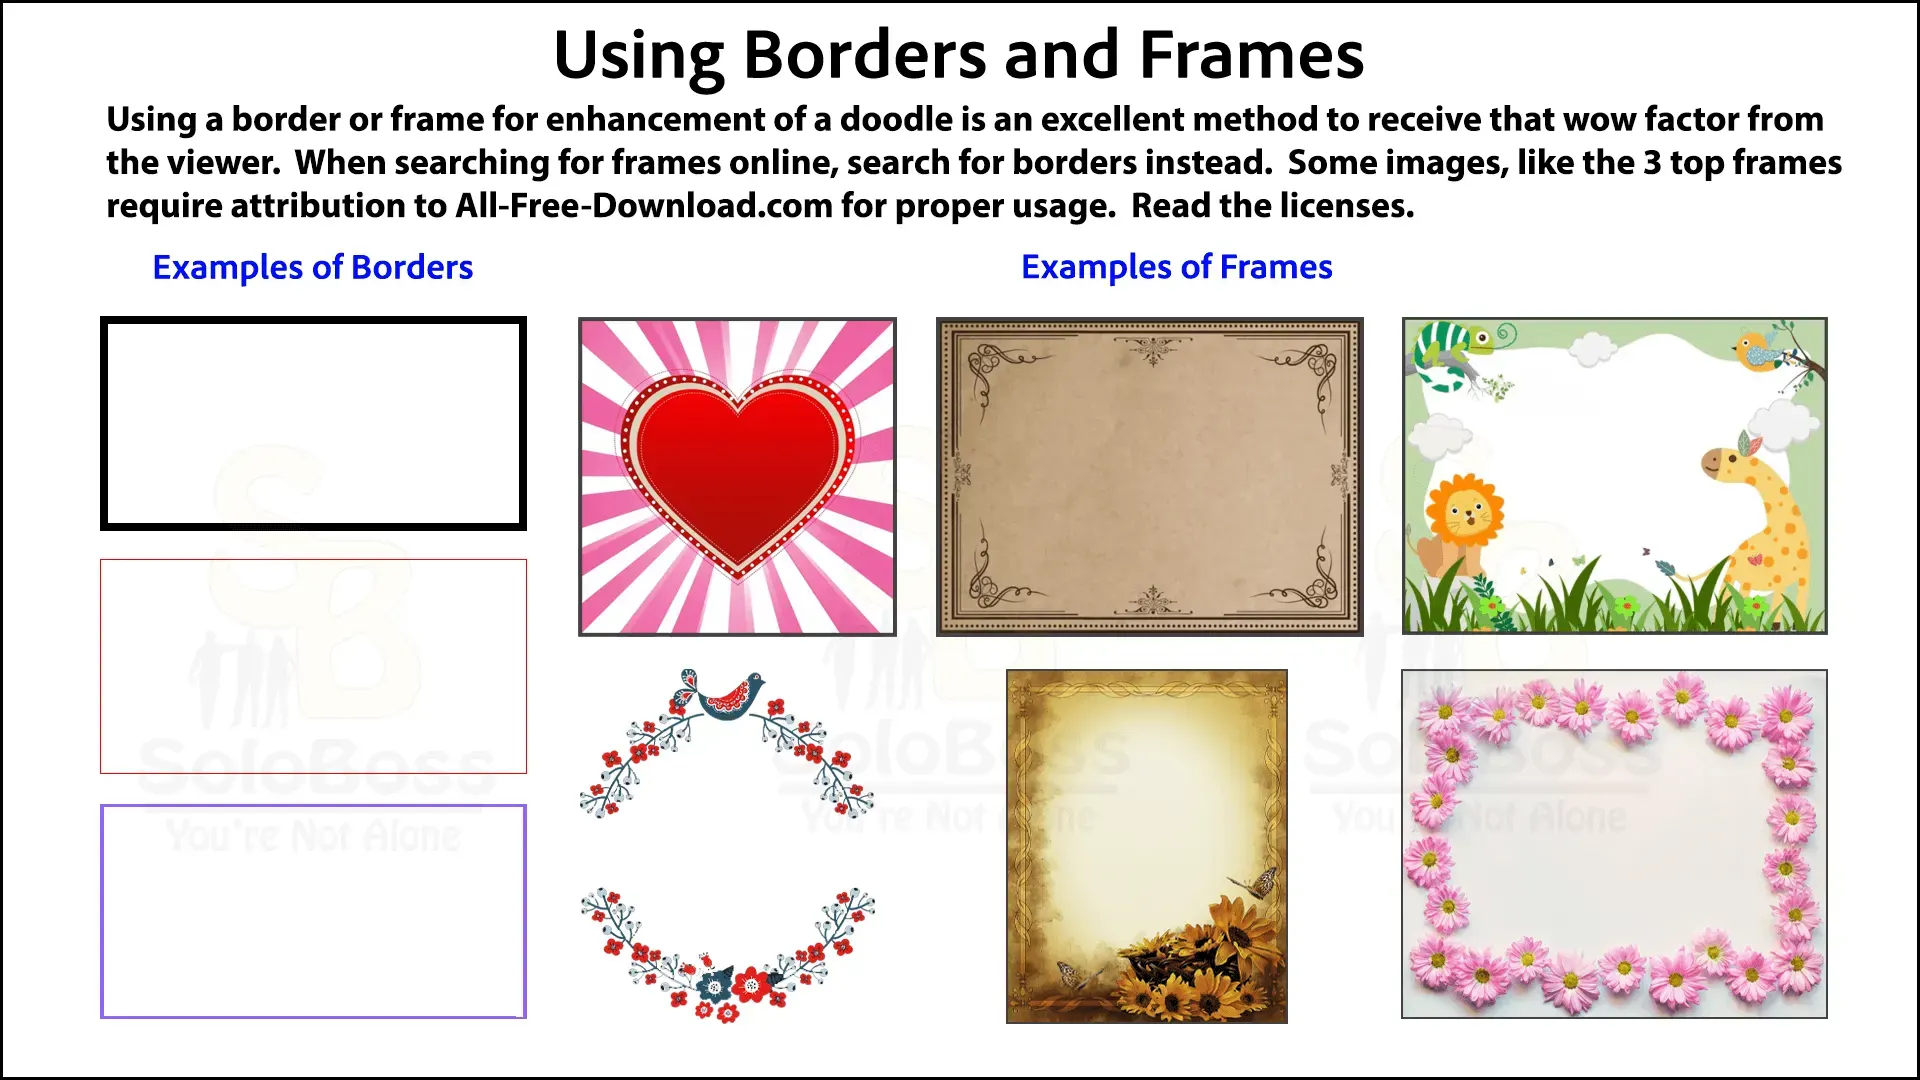 Different examples of borders and frames to use in a Doodly video.